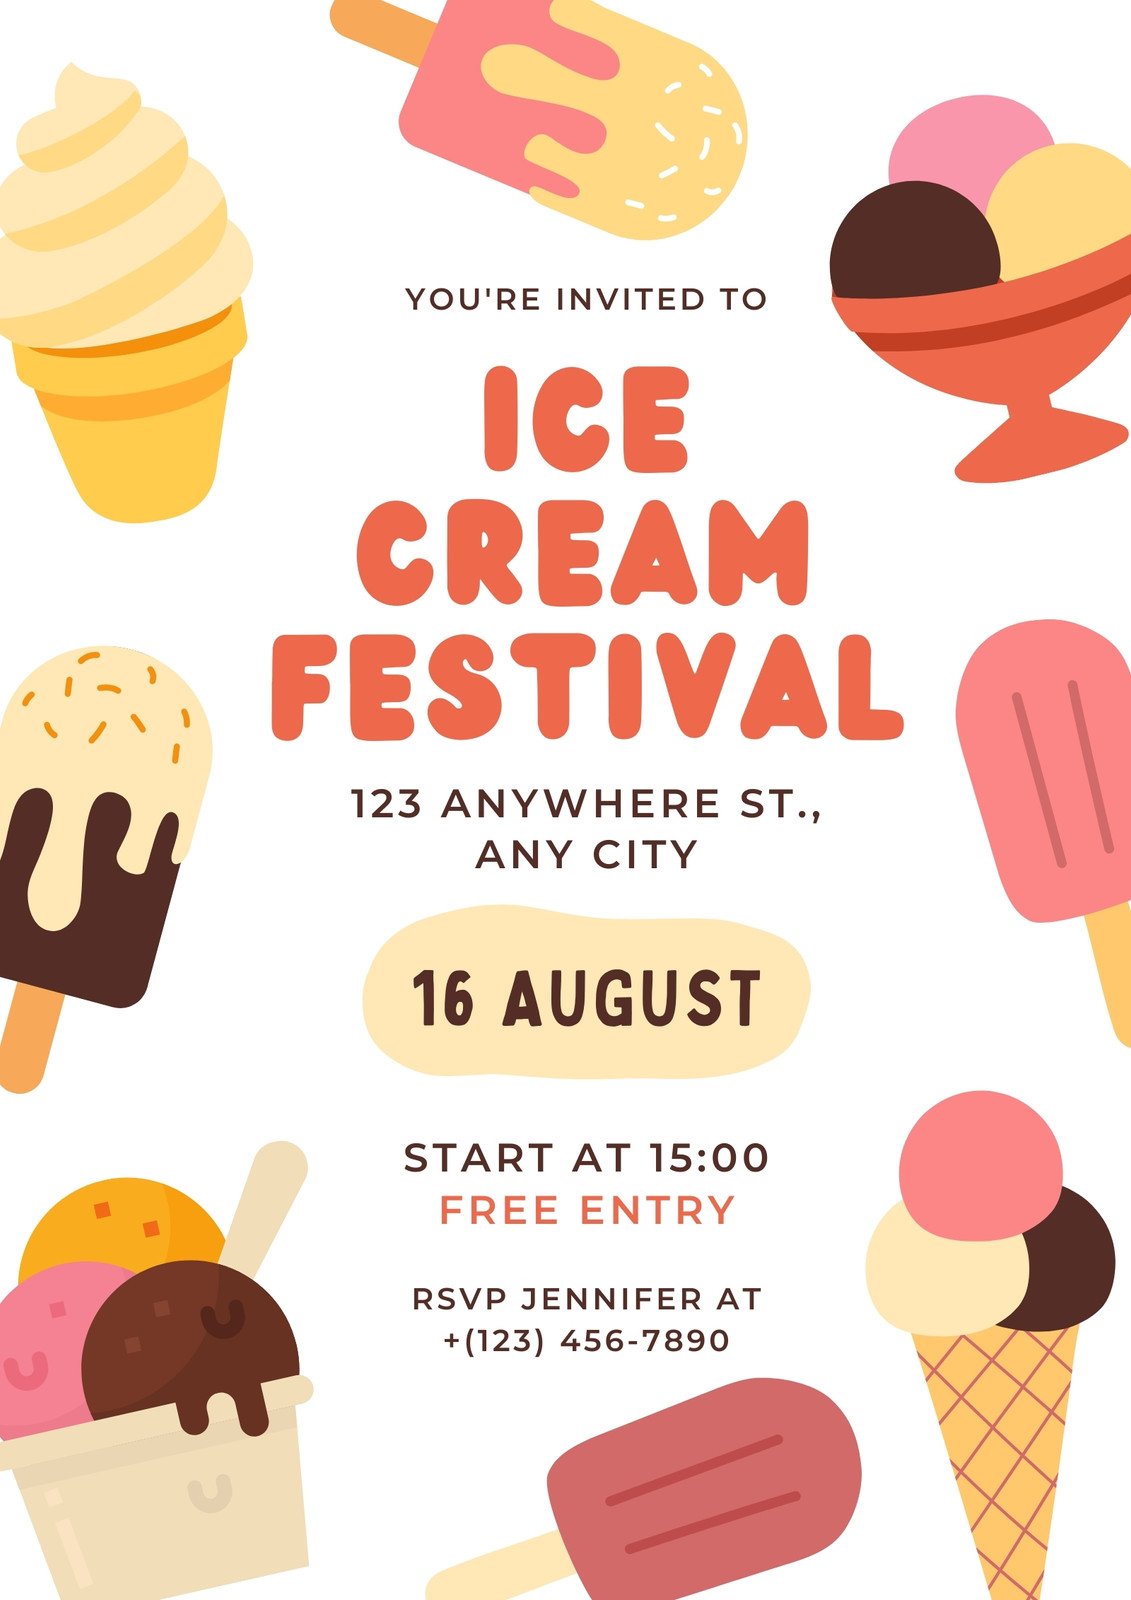 https://marketplace.canva.com/EAFl4NP4zoM/1/0/1131w/canva-colorful-playful-illustrative-summer-ice-cream-festival-flyer-7gkH1Pa5IN8.jpg